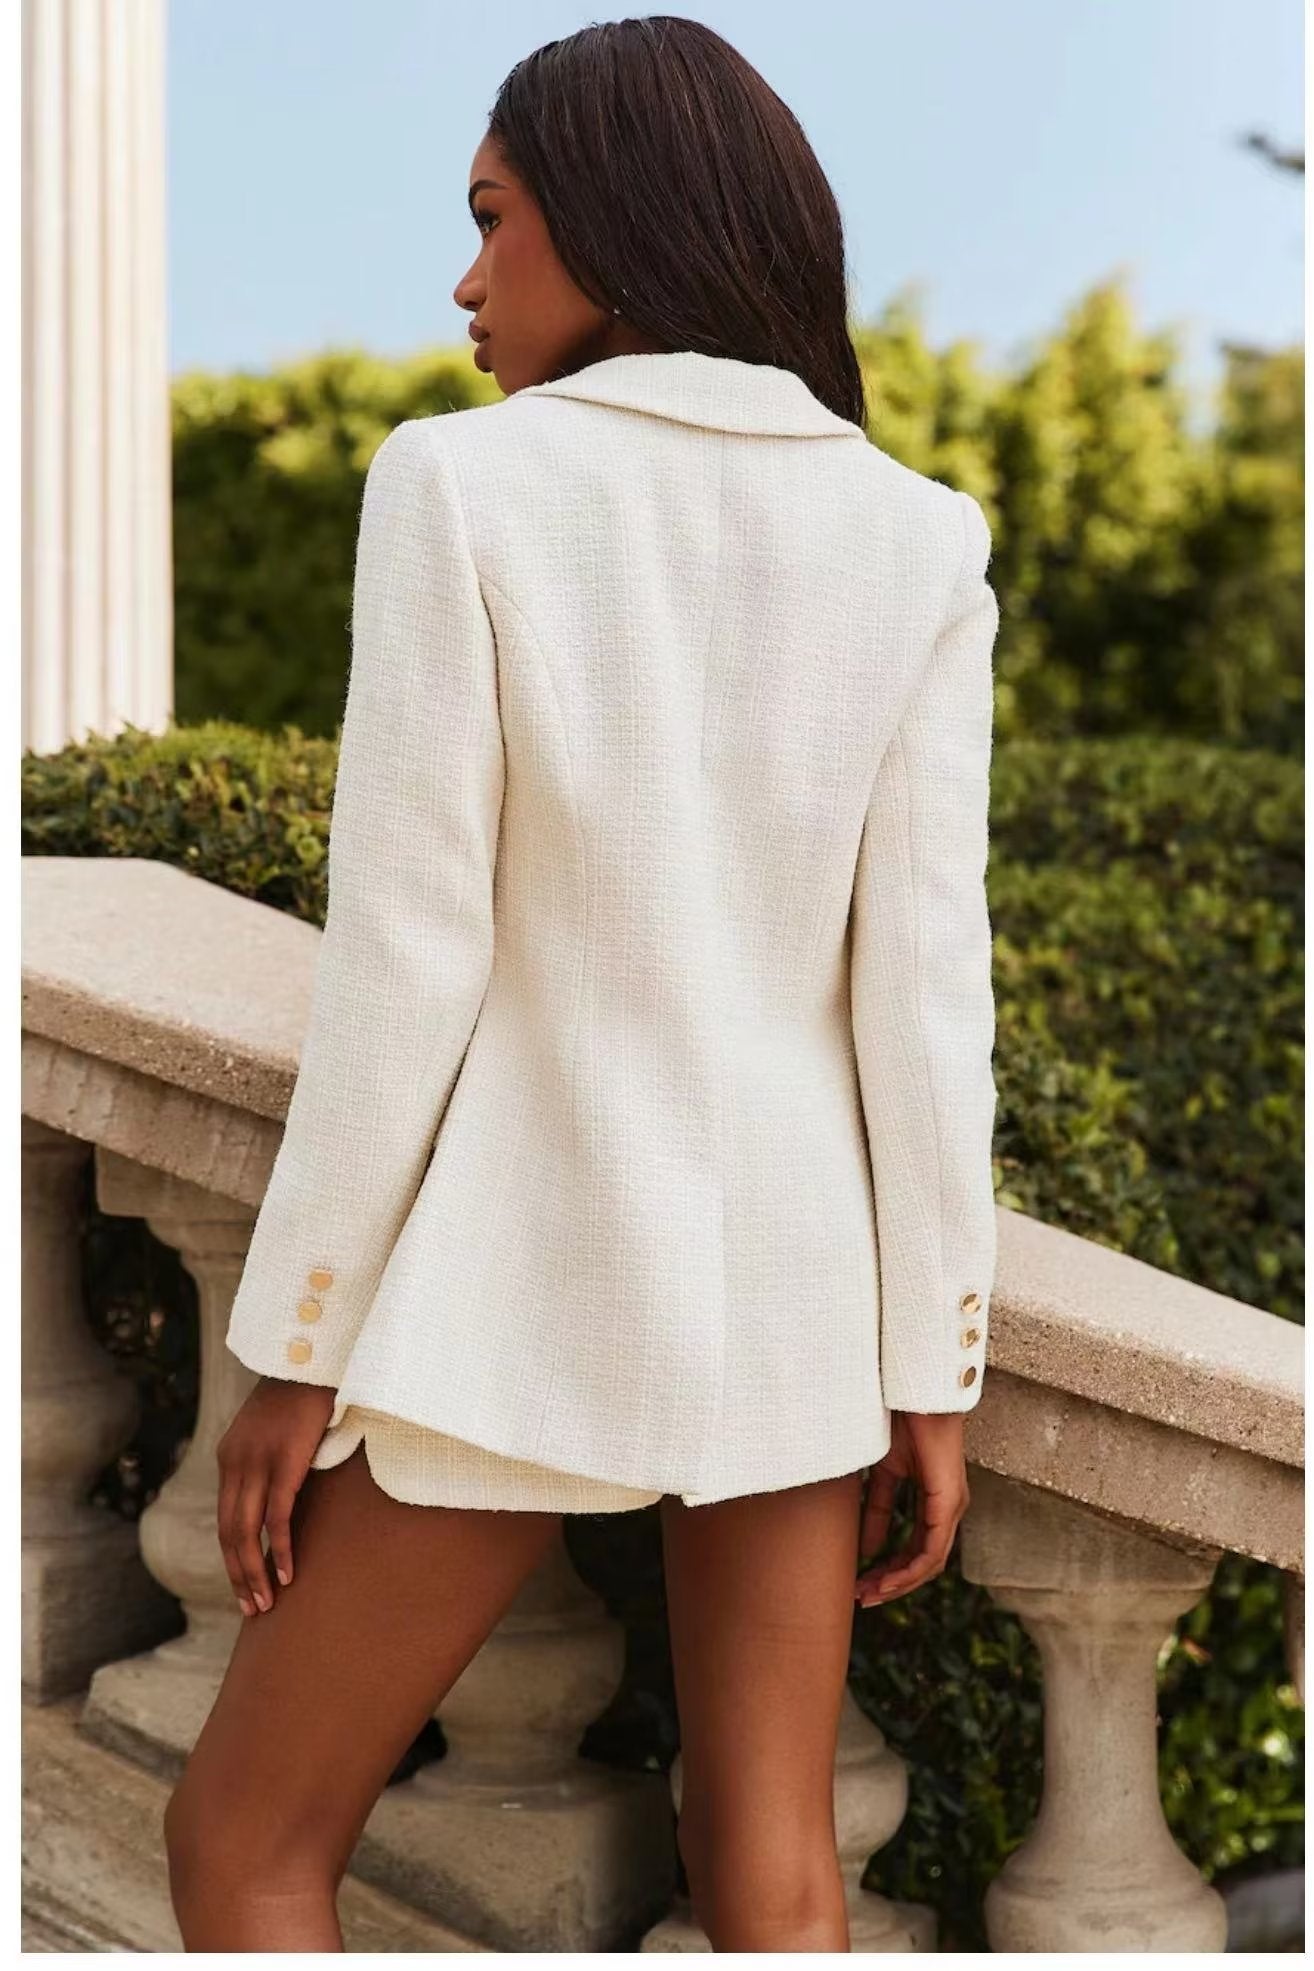 French Chanel Blazer Suit Set Shorts Two Piece Elegant Women  Clothing Autumn Solid Color Casual Small Set